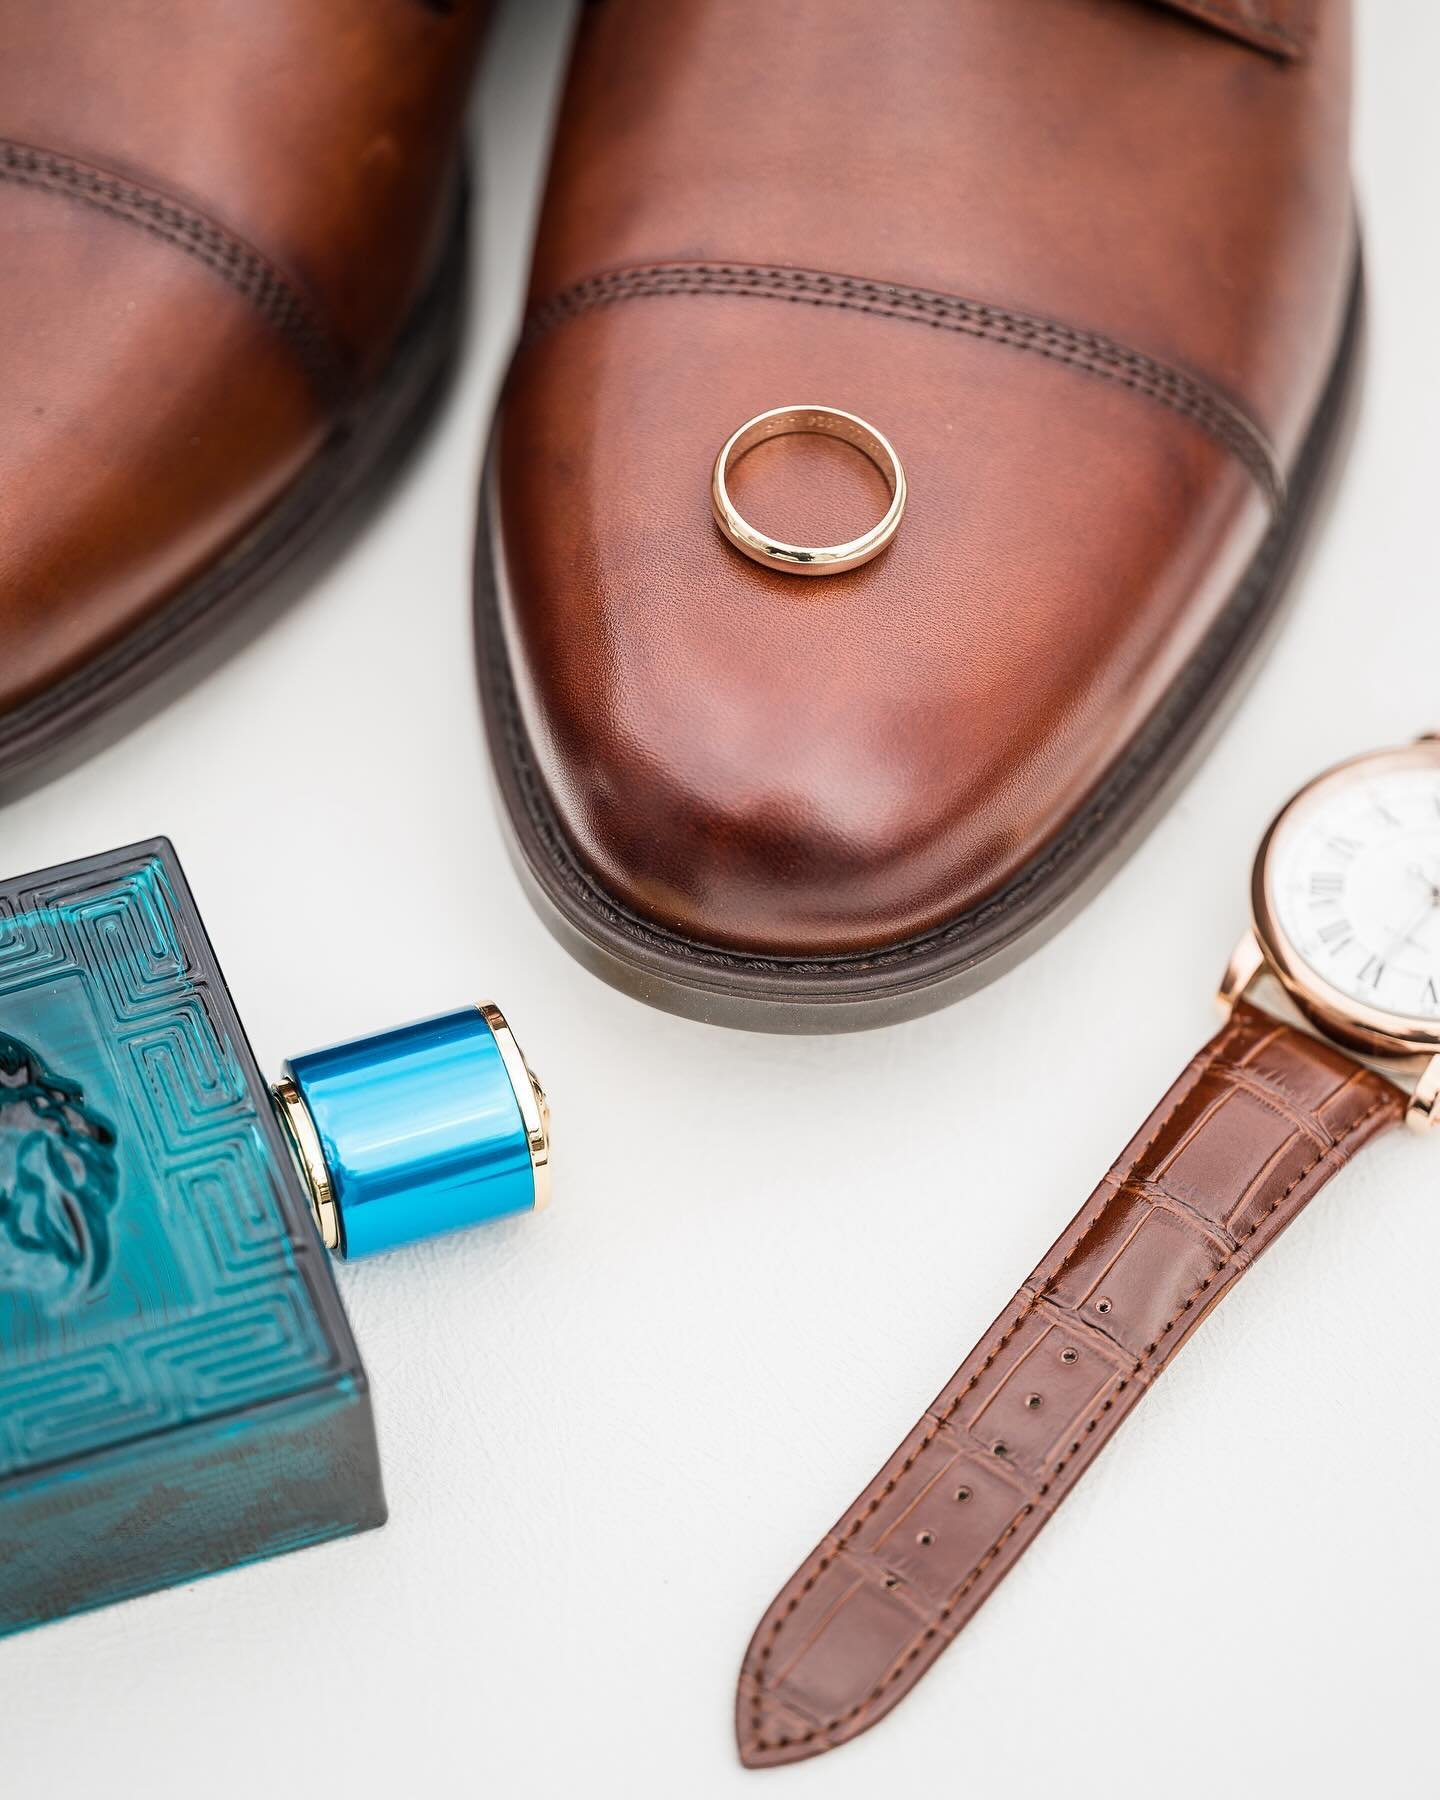 Groom details are as important as bride&rsquo;s.. which is why I always give my groom&rsquo;s a list of things to have in a box/bag ready for me on their wedding day. These things include: shoes, jewelry, tie/bow tie, watch, cufflinks, cologne, bouto